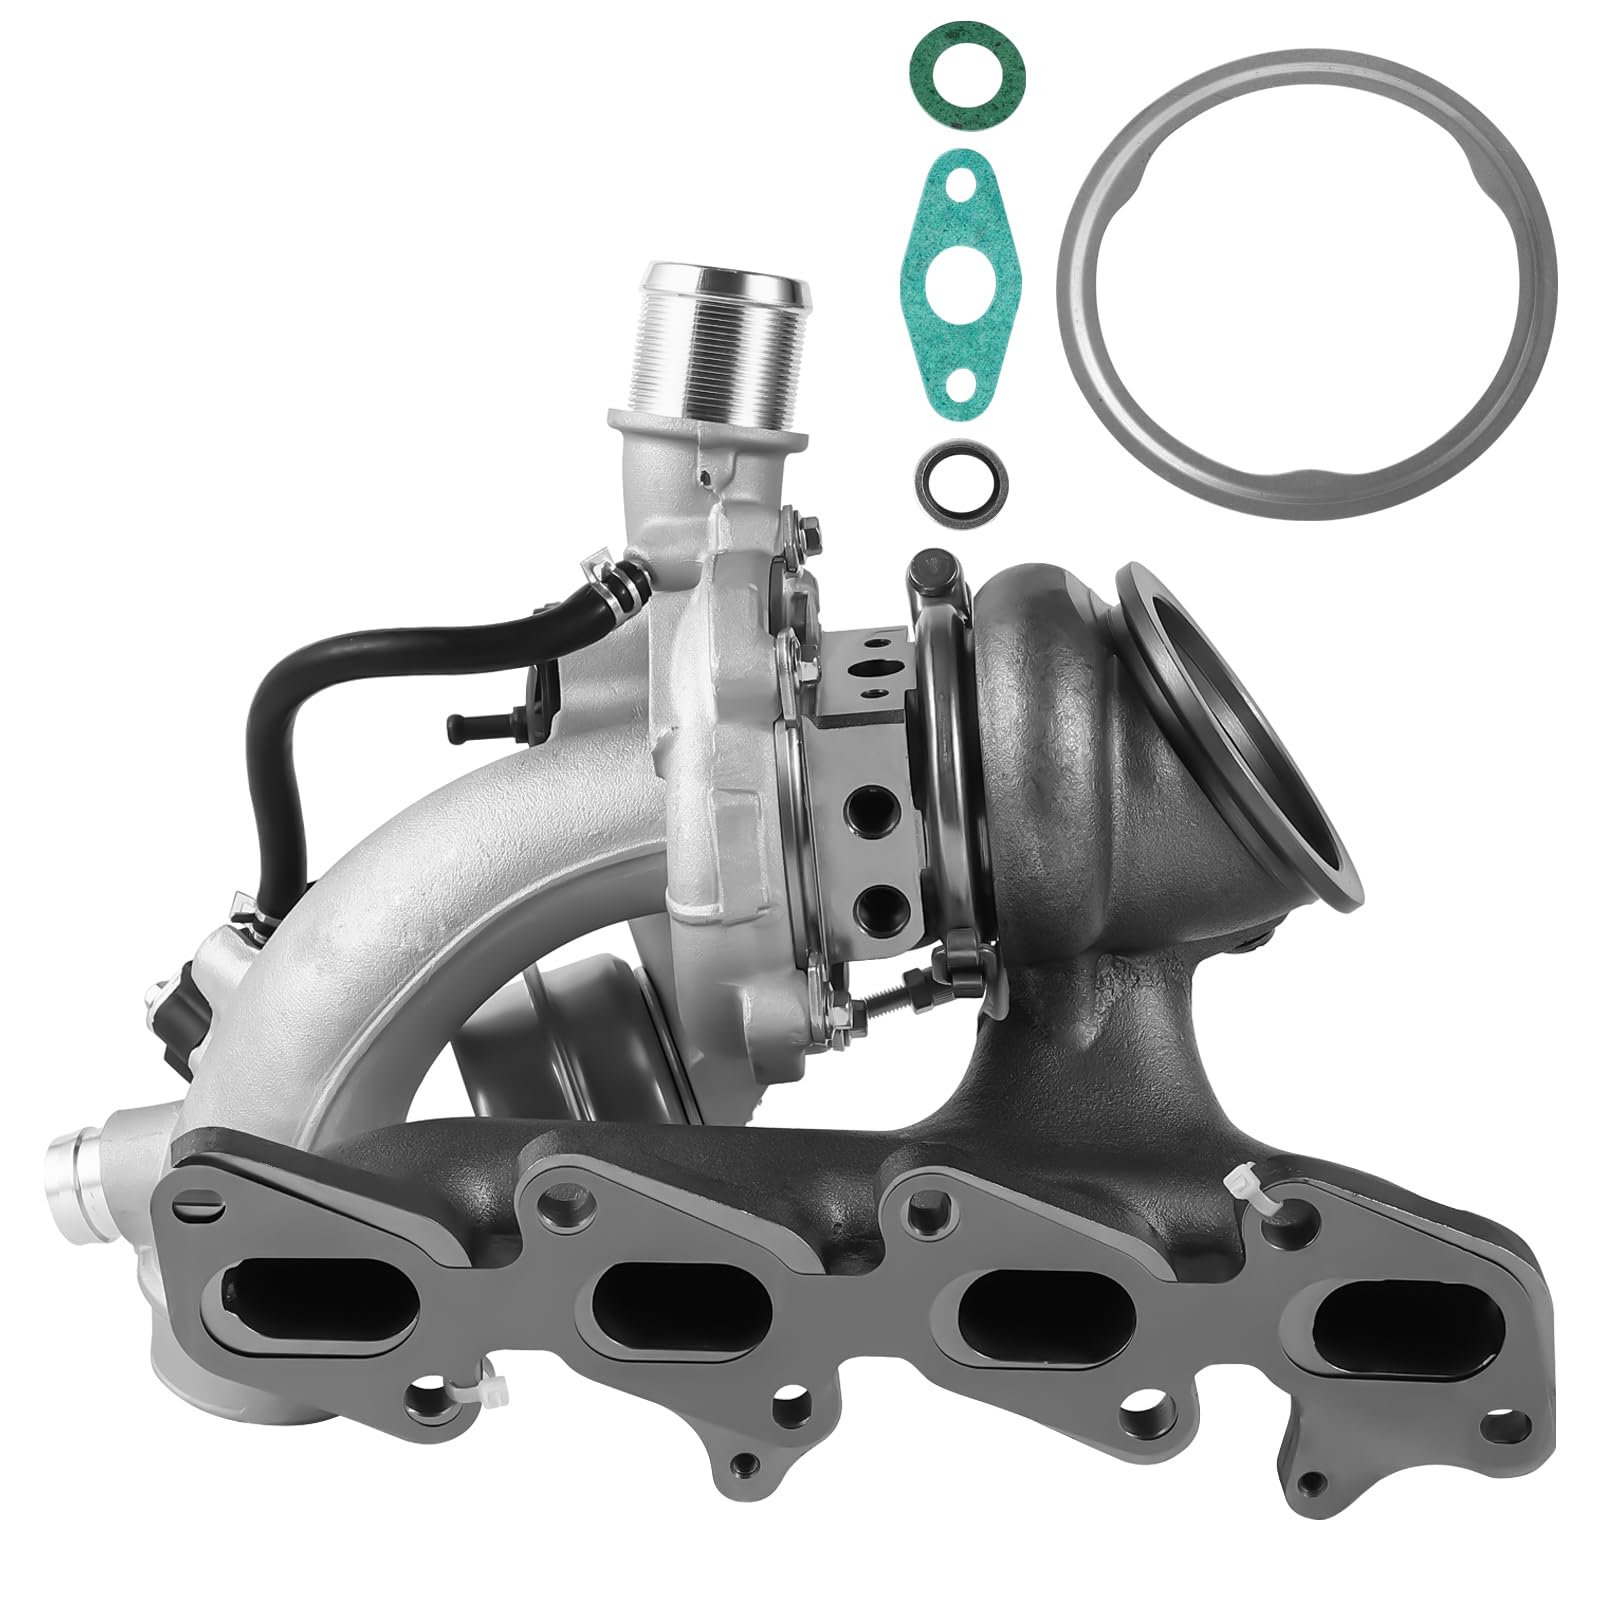 Turbocharger & Gasket Kit for Chevy Cruze Sonic Trax - Enhanced